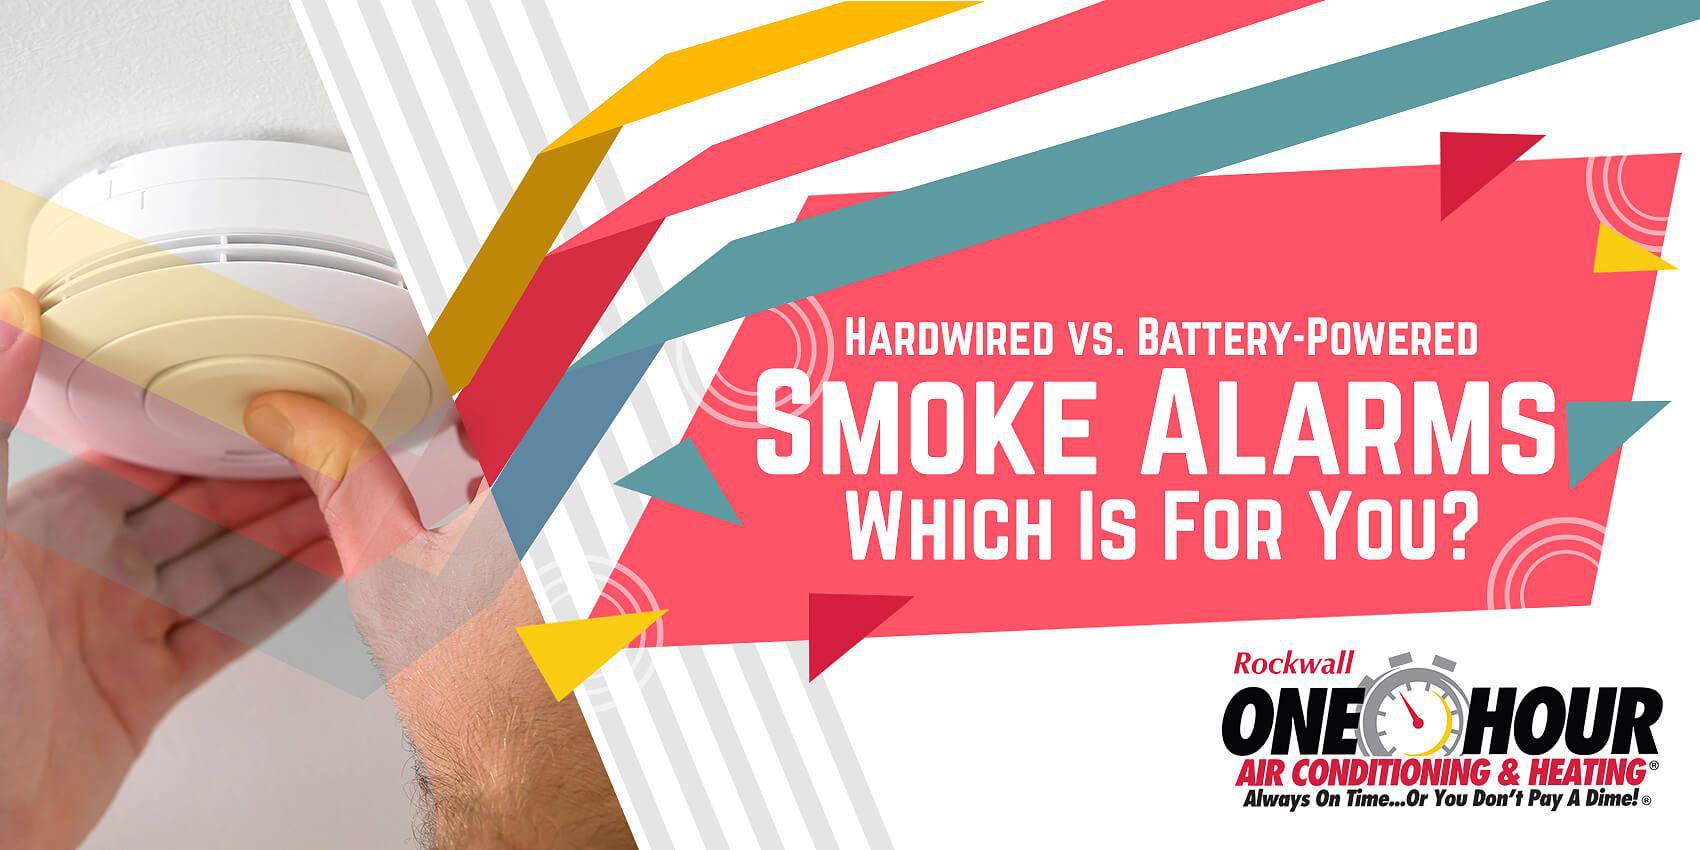 Hardwired vs. Battery-Powered Smoke Alarms—Which Is For You?